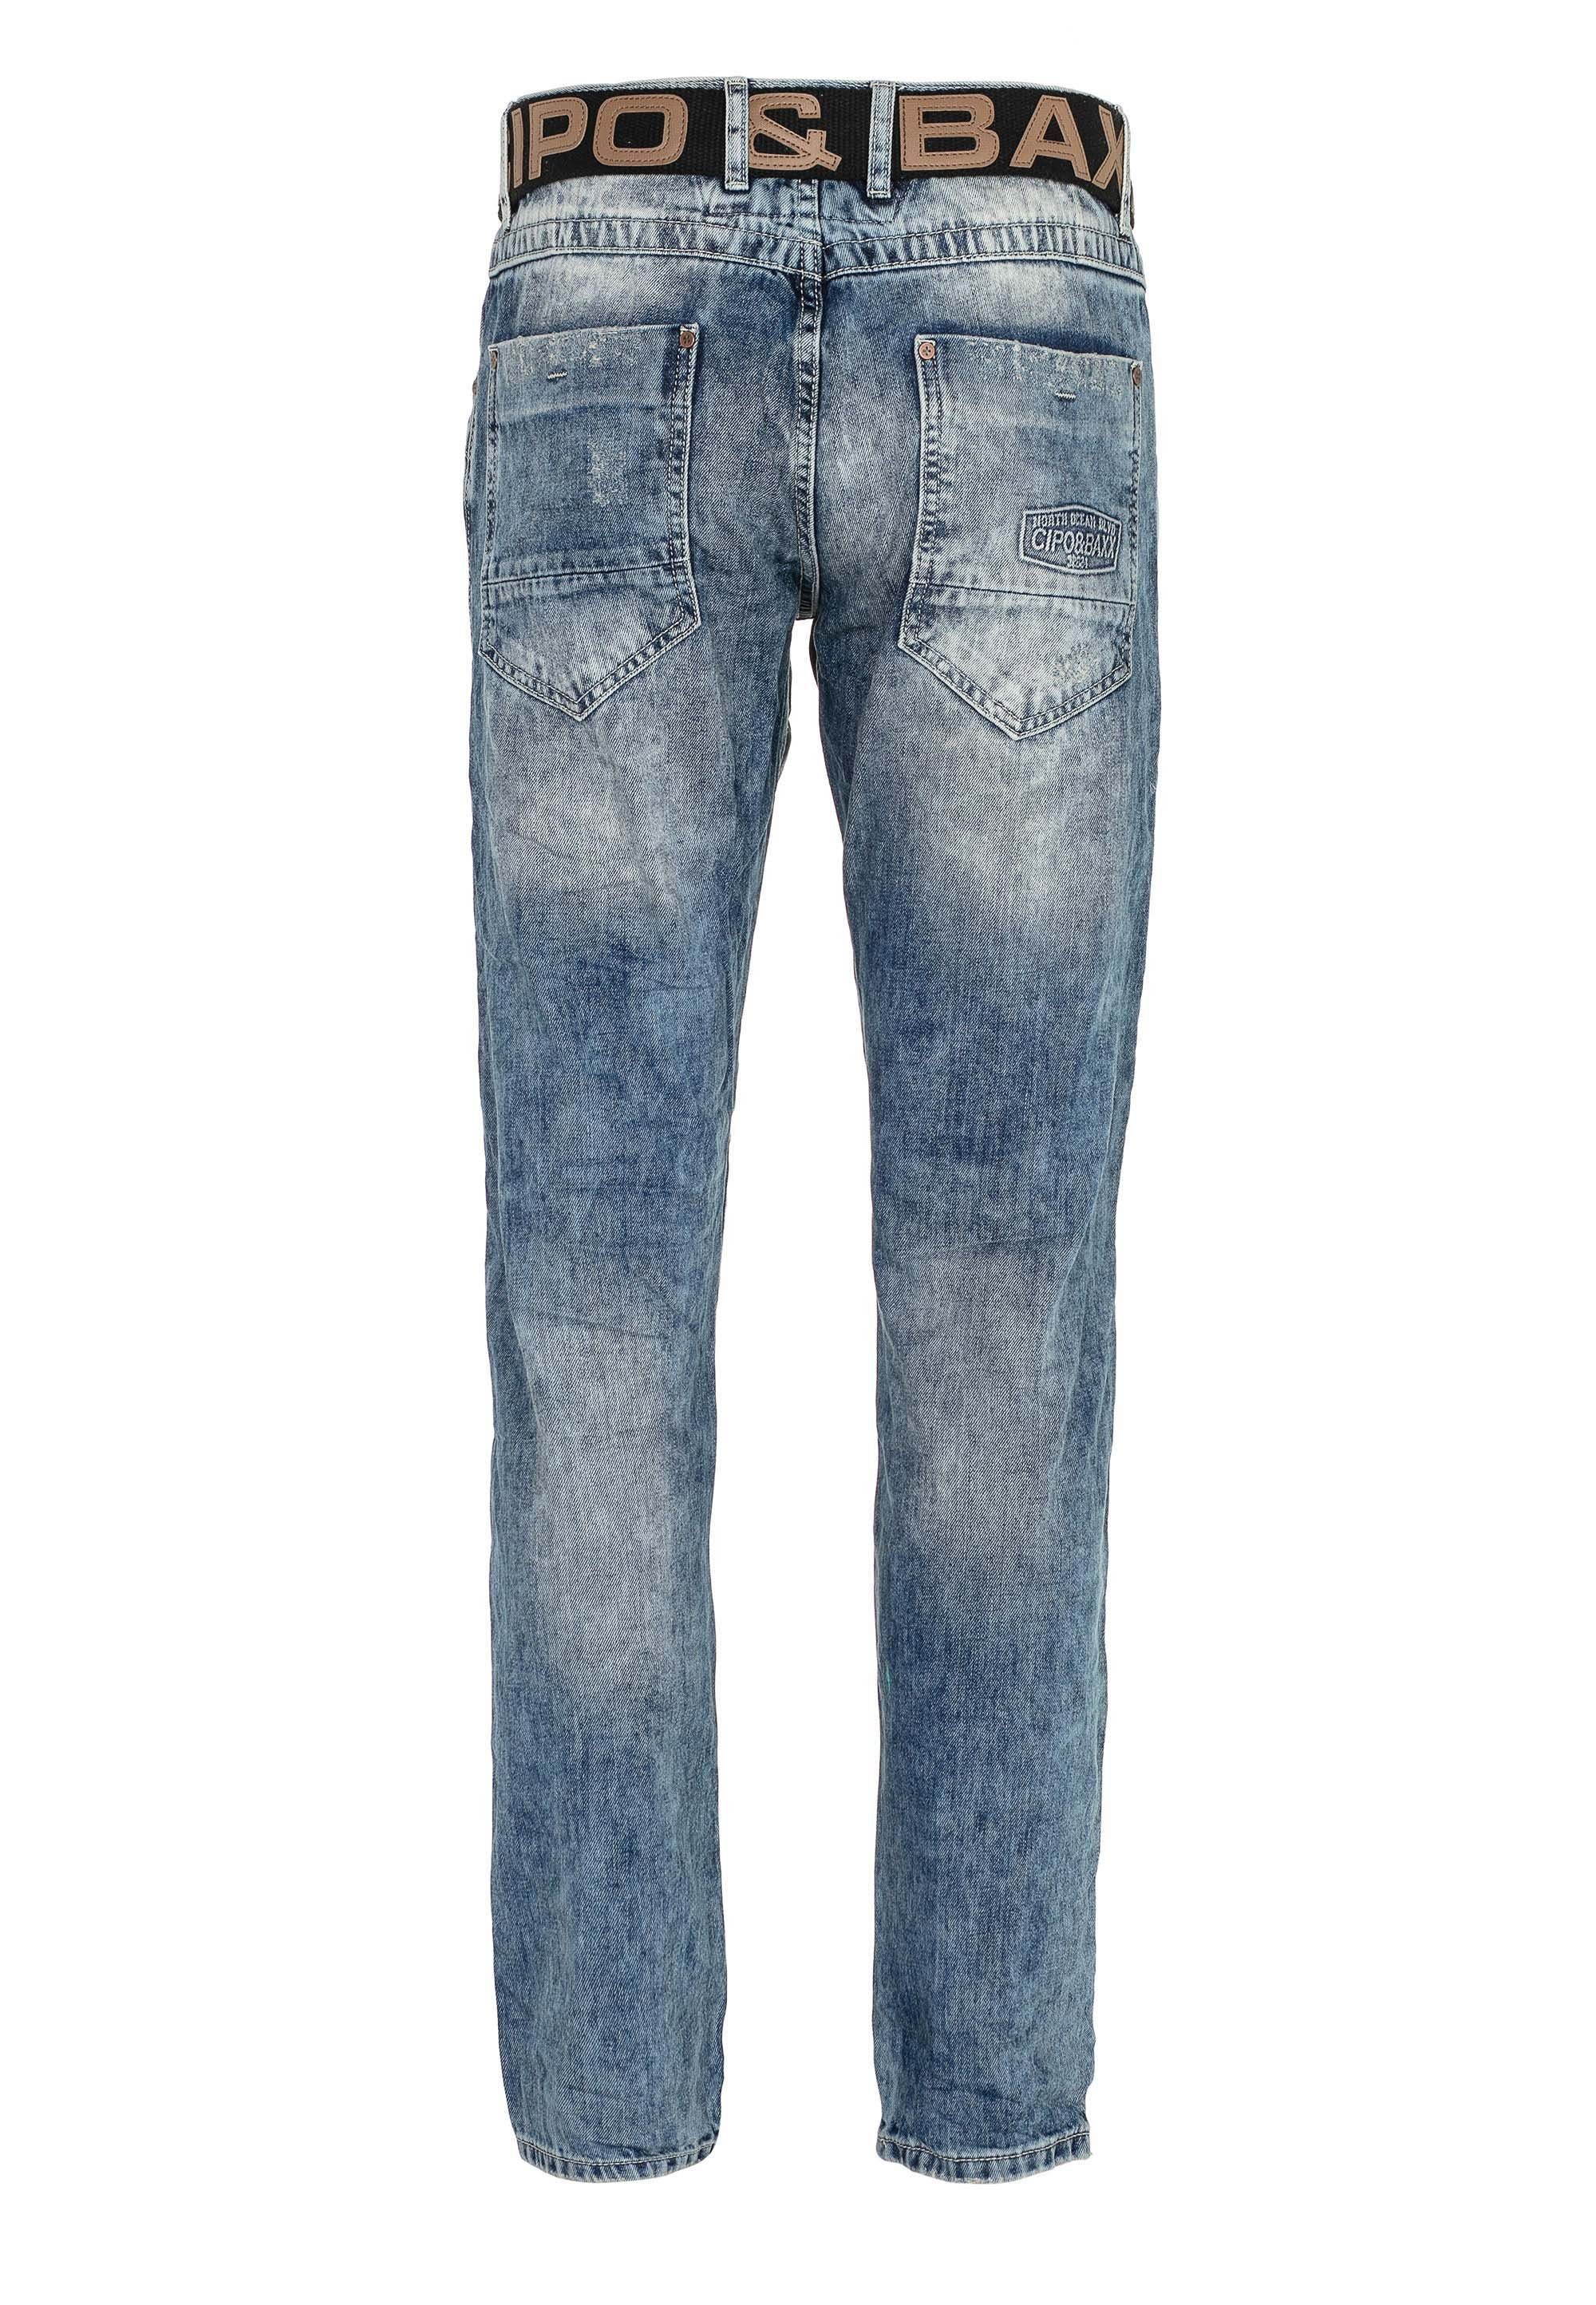 Cipo & Baxx mit Jeans Straight-Fit Details Bequeme Ripped in